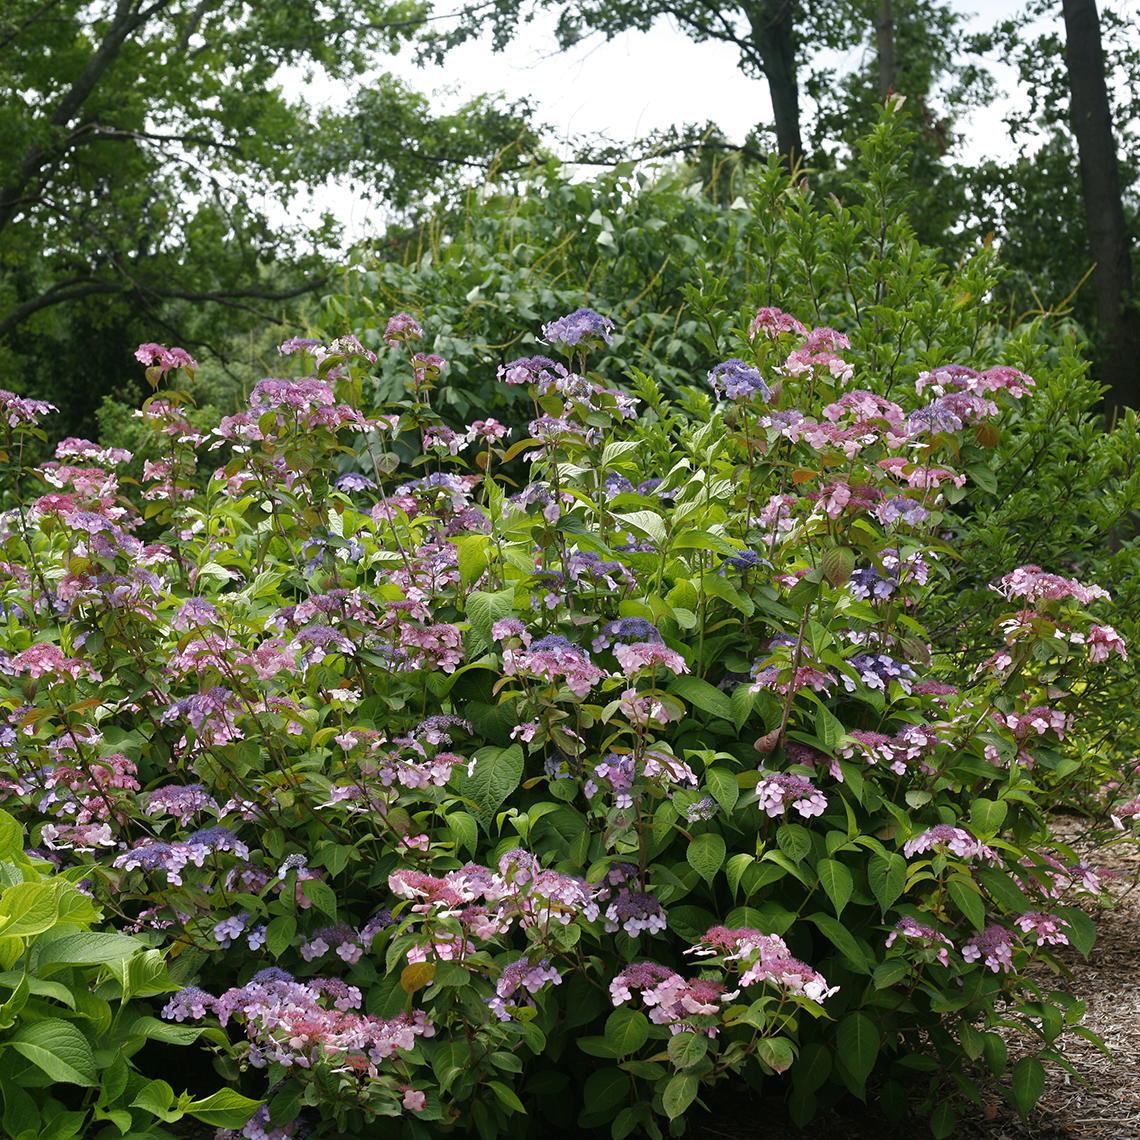 A specimen of Twirligig mountain hydrangea blooming in a landscape with both pink and blue flowers